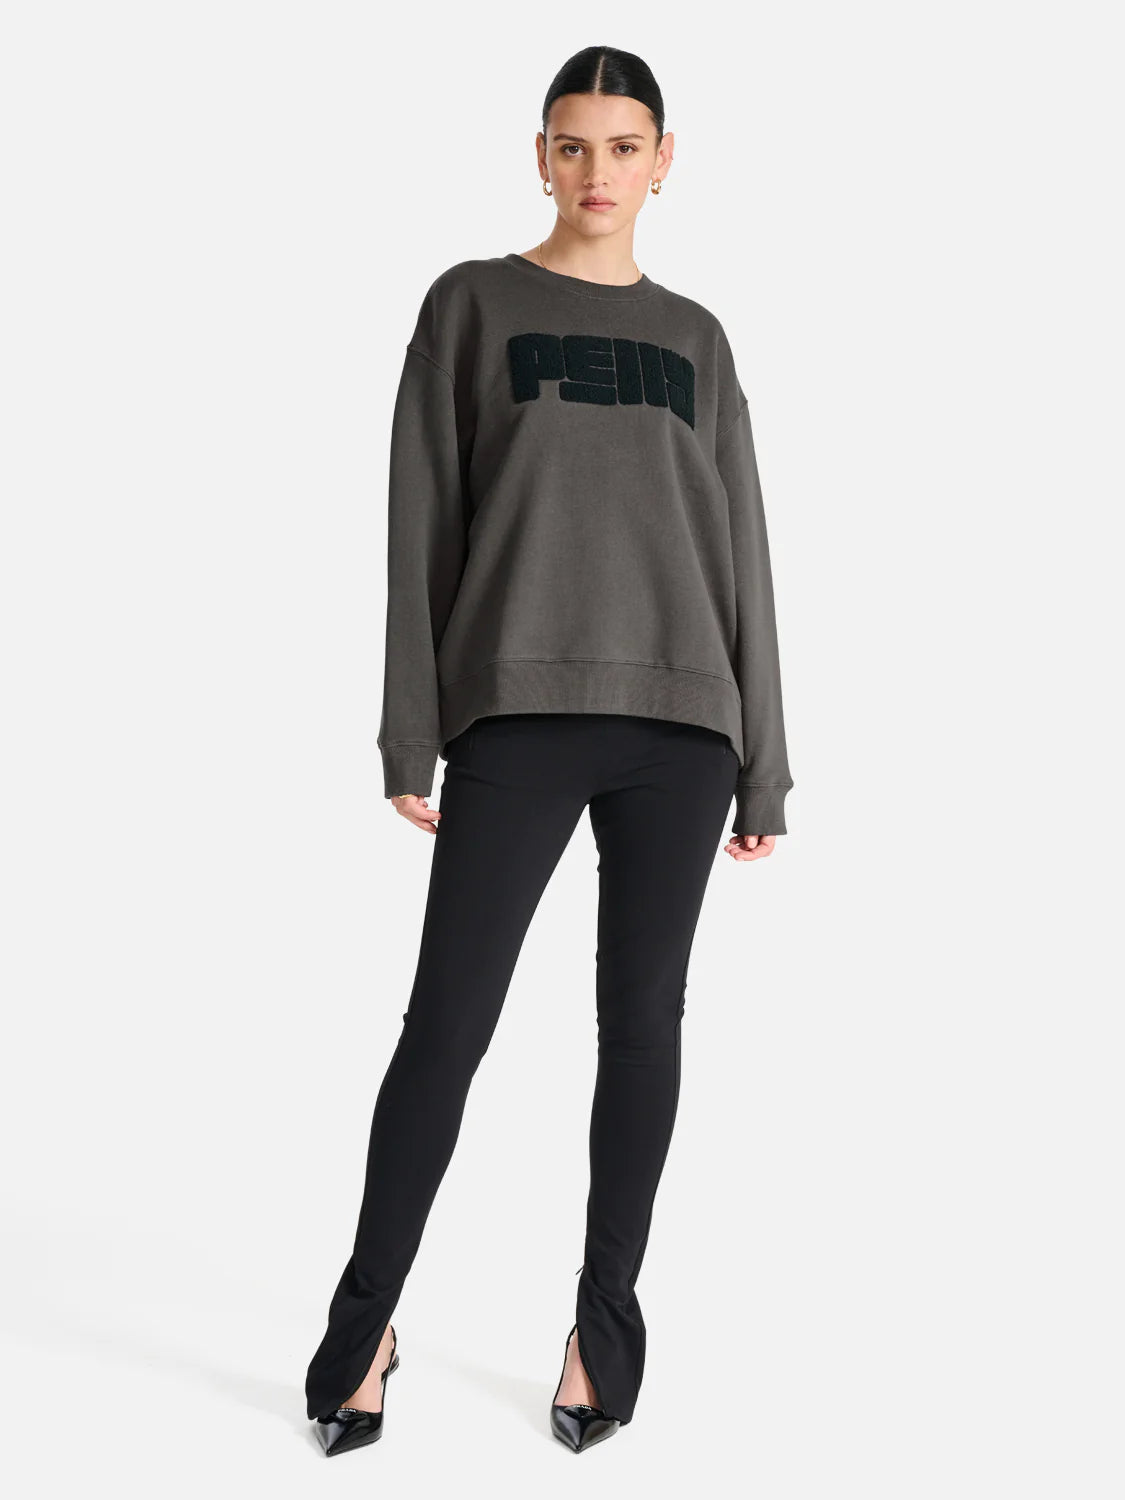 ENA PELLY  Pelly Text Sweater